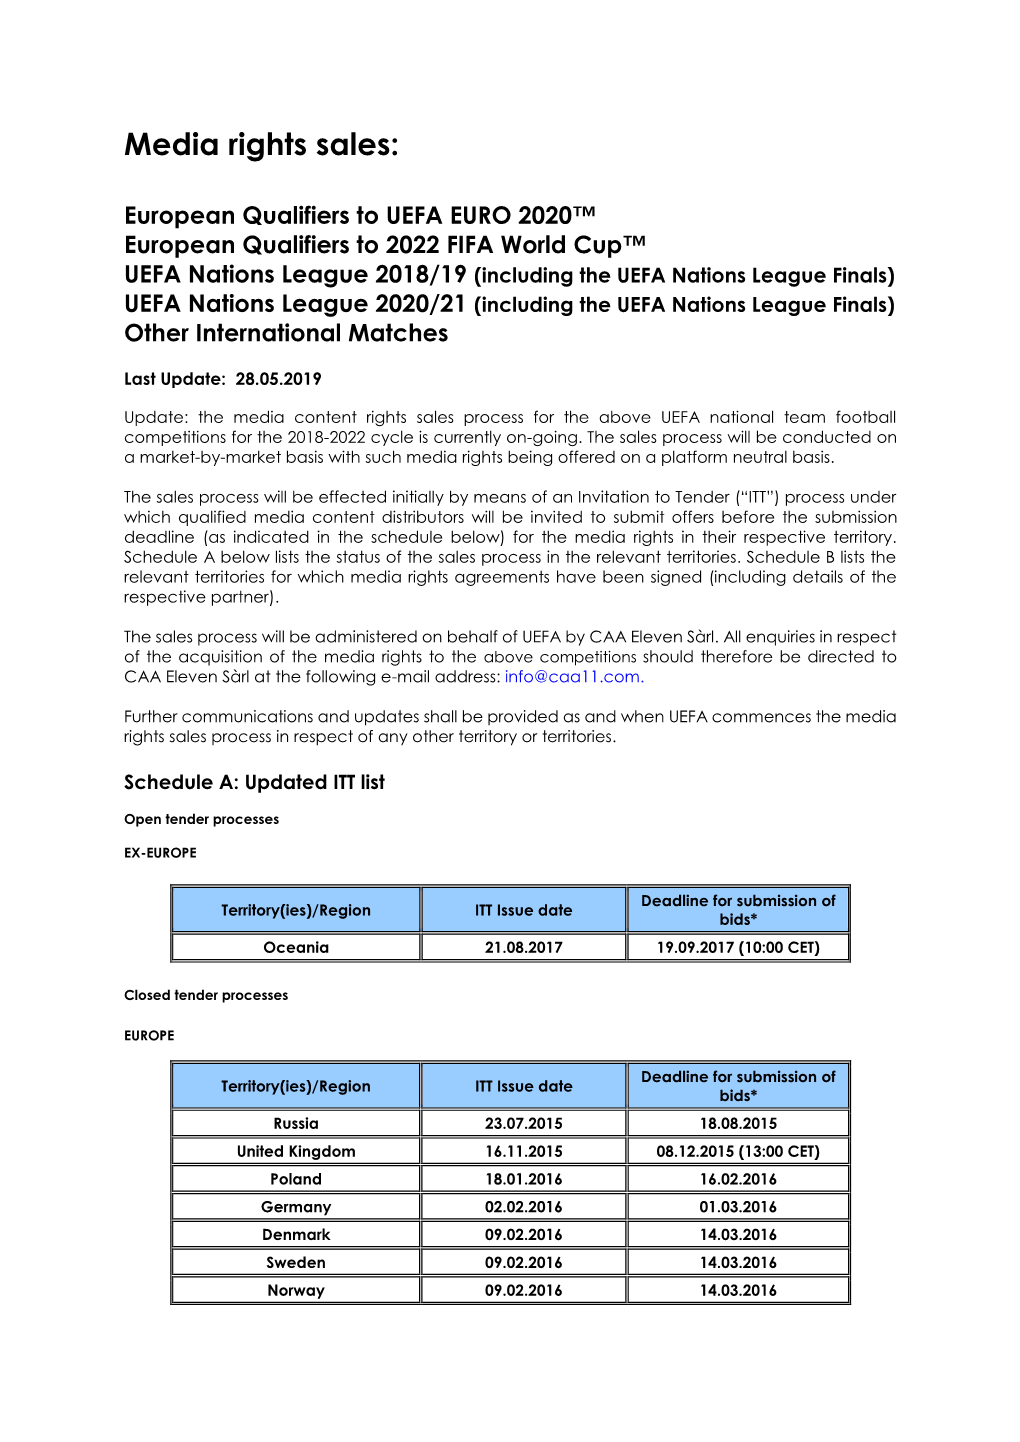 Media Rights Sales European Qualifiers and Nations League